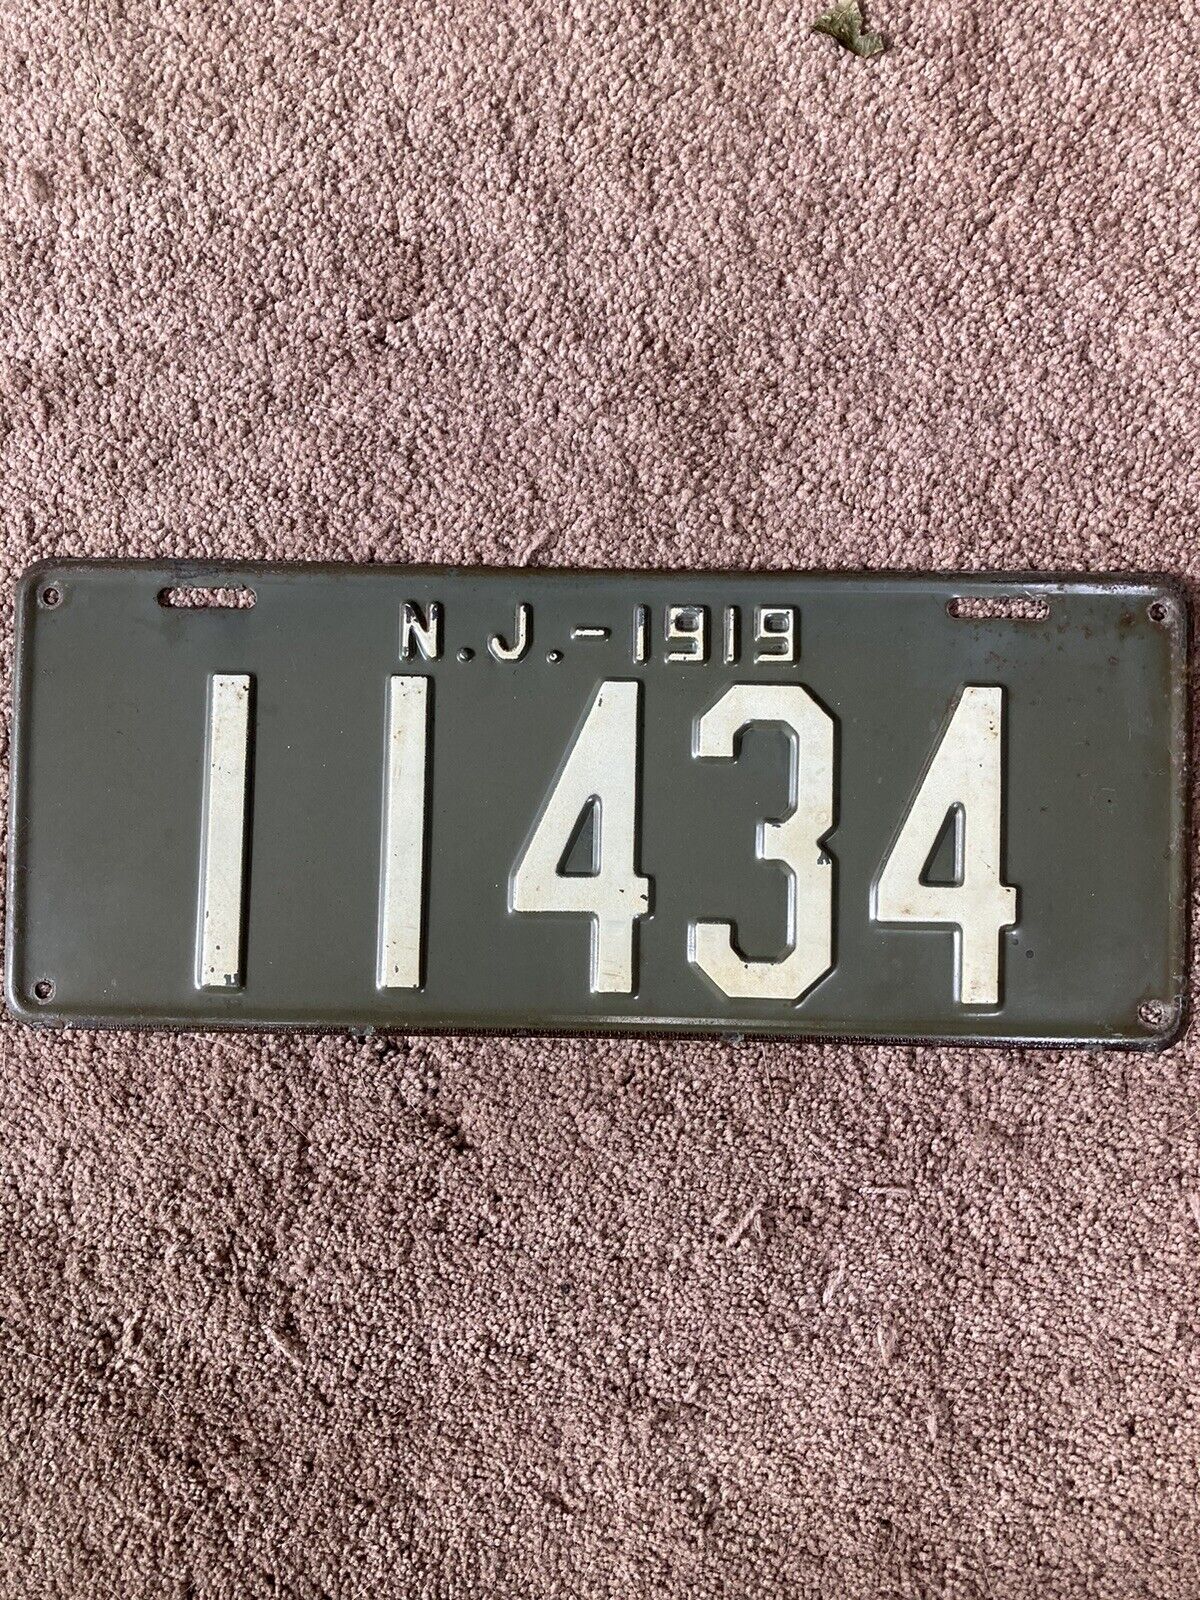 1919 New Jersey License Plate - 11434 - Very Nice